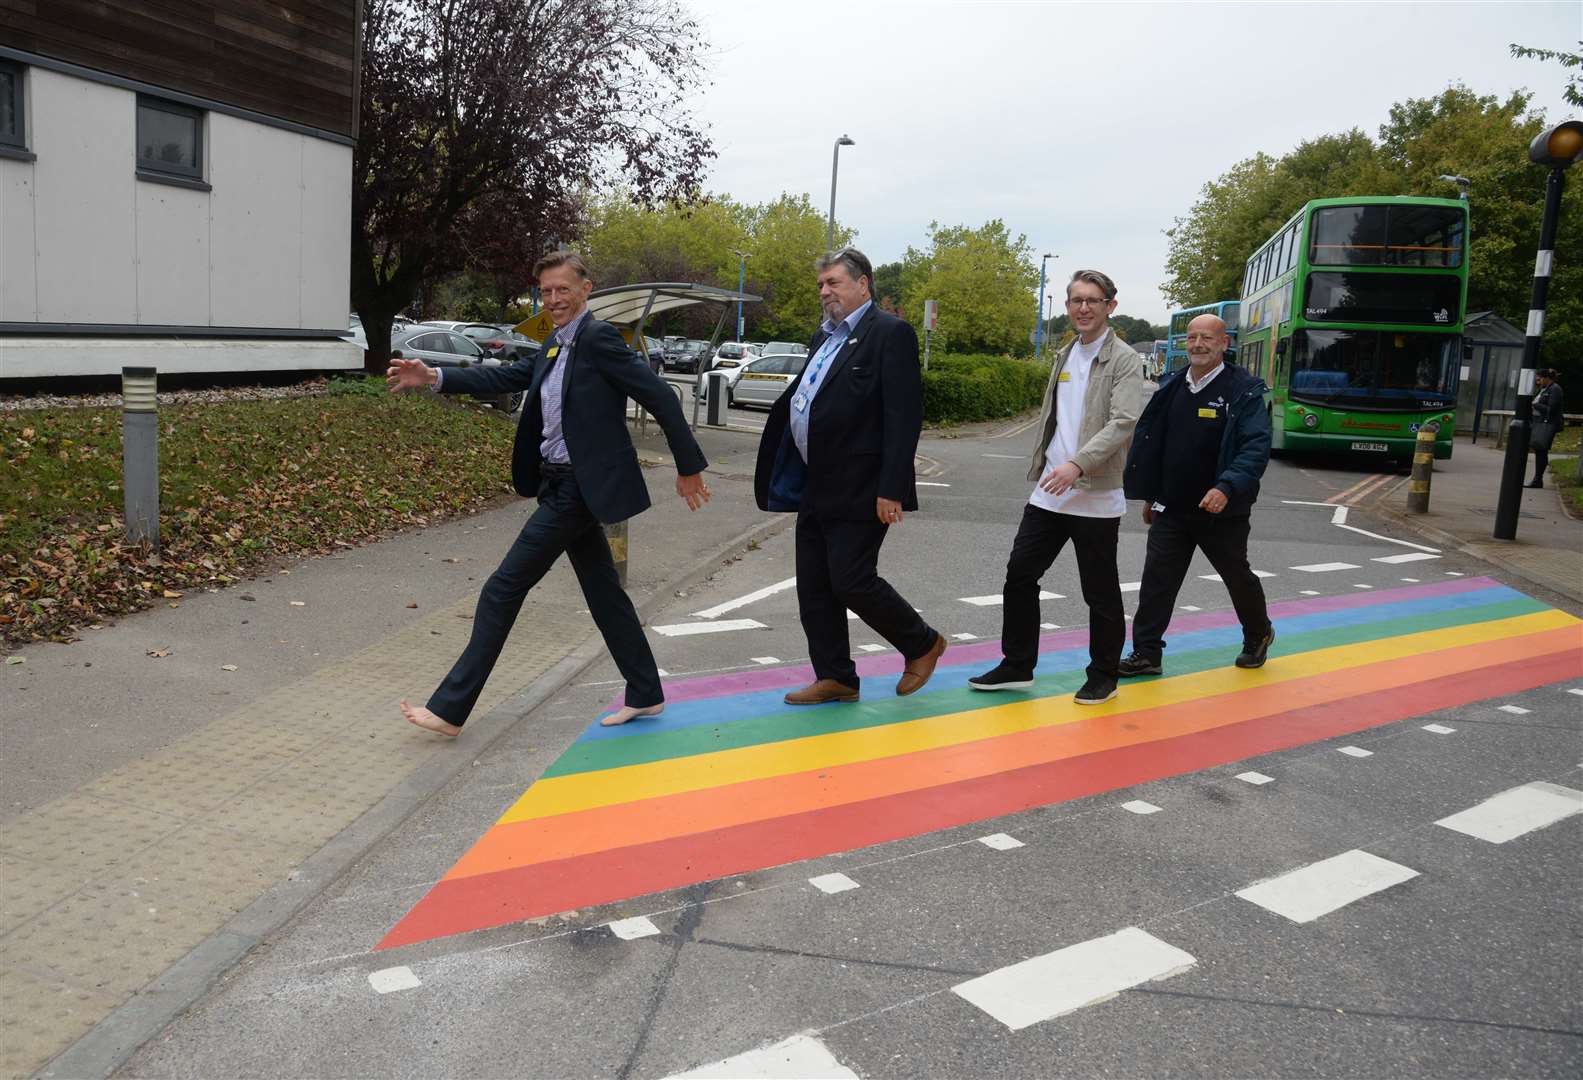 The NHS trust's chief executive Miles Scott, board chairman David Highton, theraphy radiographer Alex Beardmore and chairman of the LGBT Network Mick Stupple try out the rainbow crossing at Maidstone Hospital